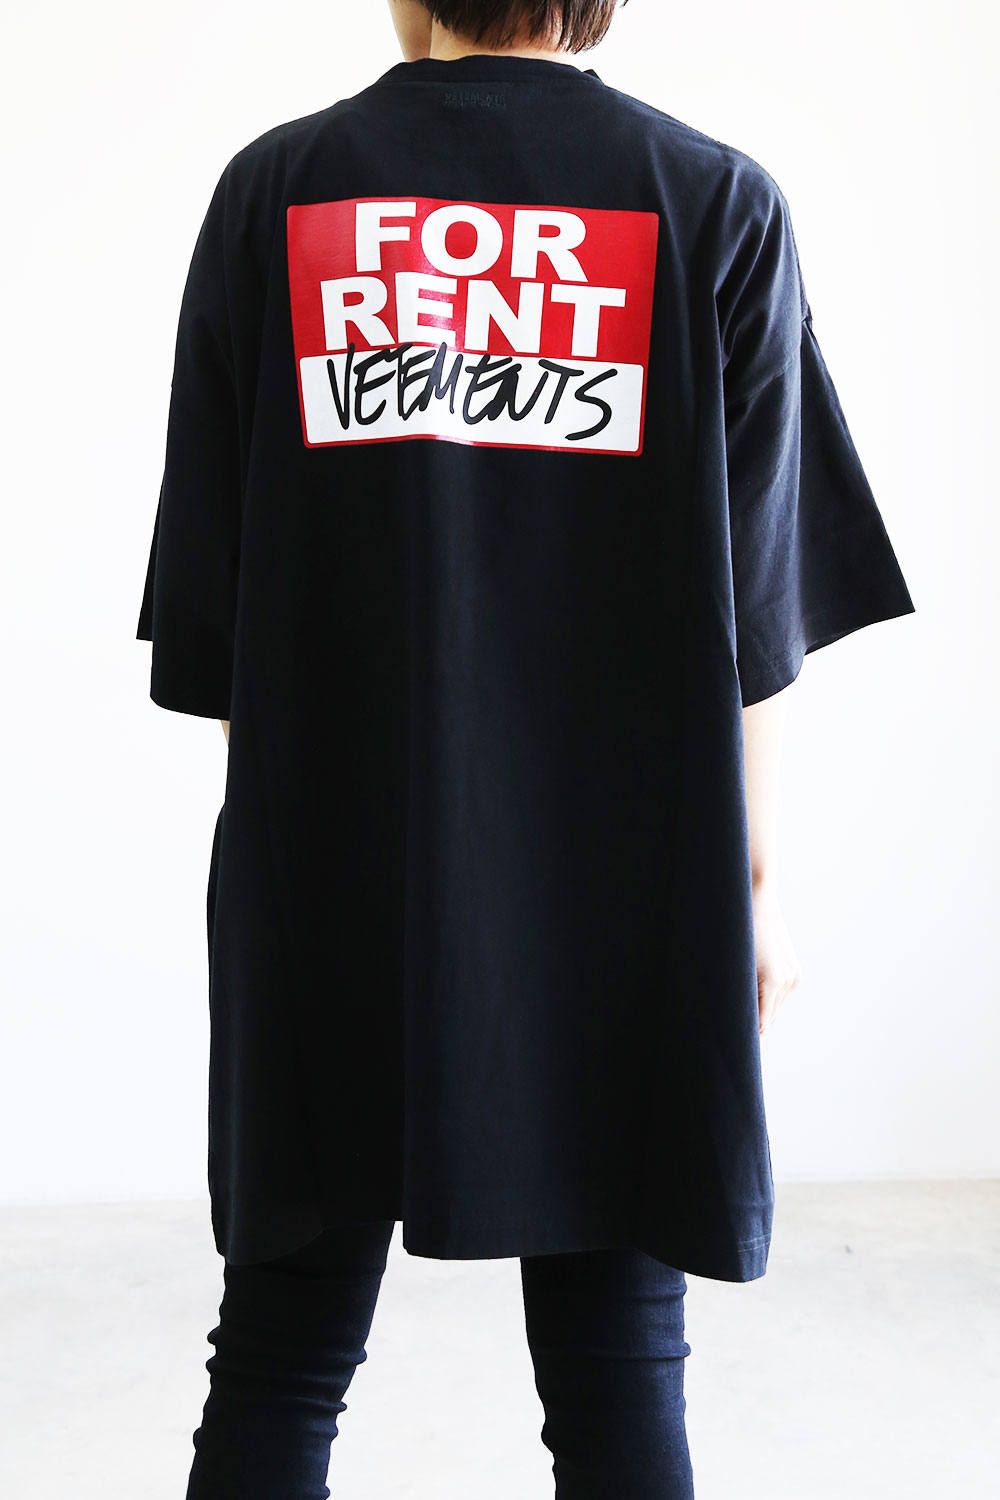 VETEMENTS  20ss  FOR RENT  シャツ